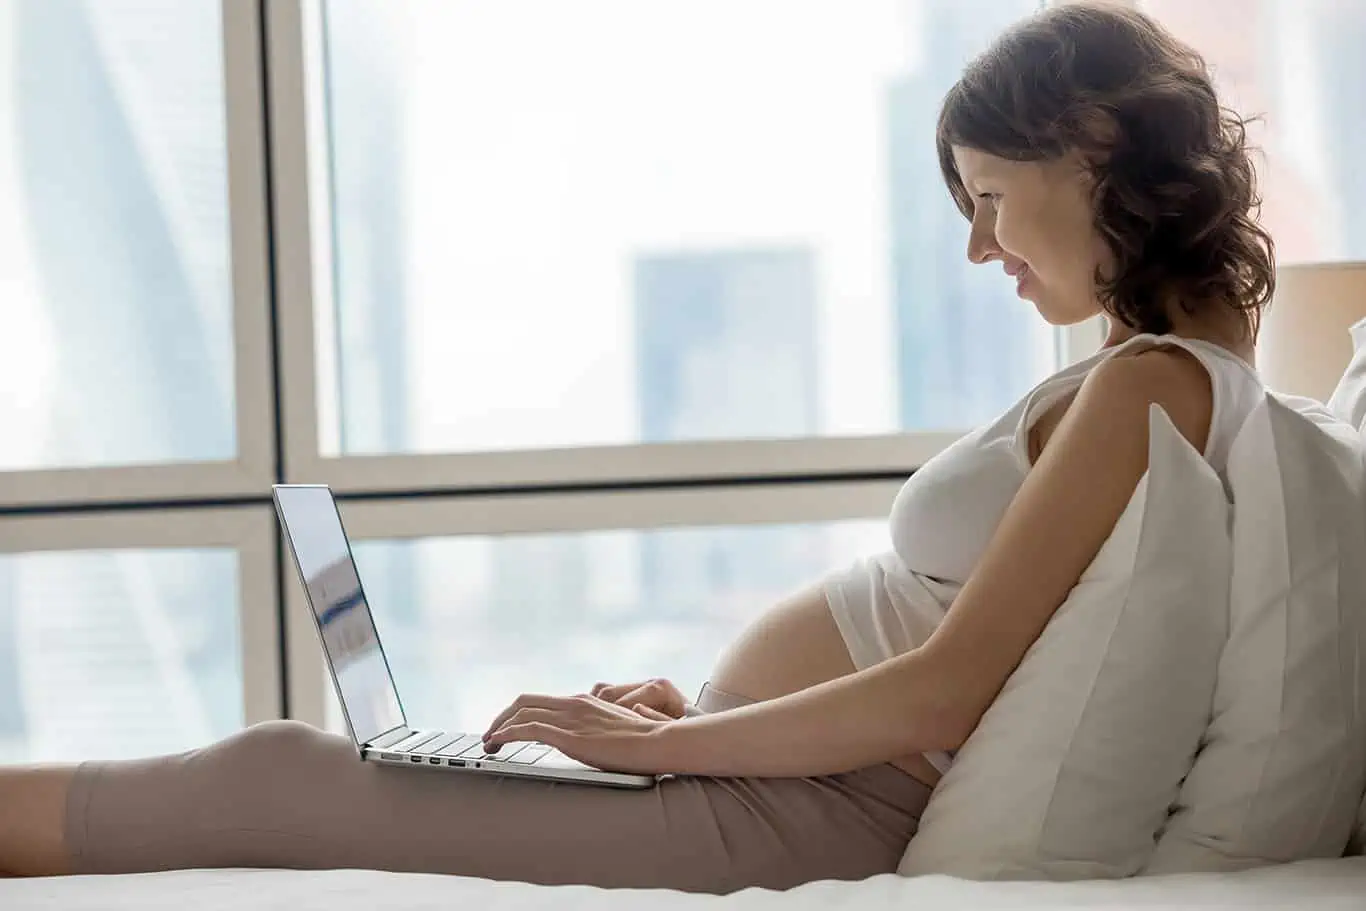 Moving While Pregnant Tip - Plan on Working